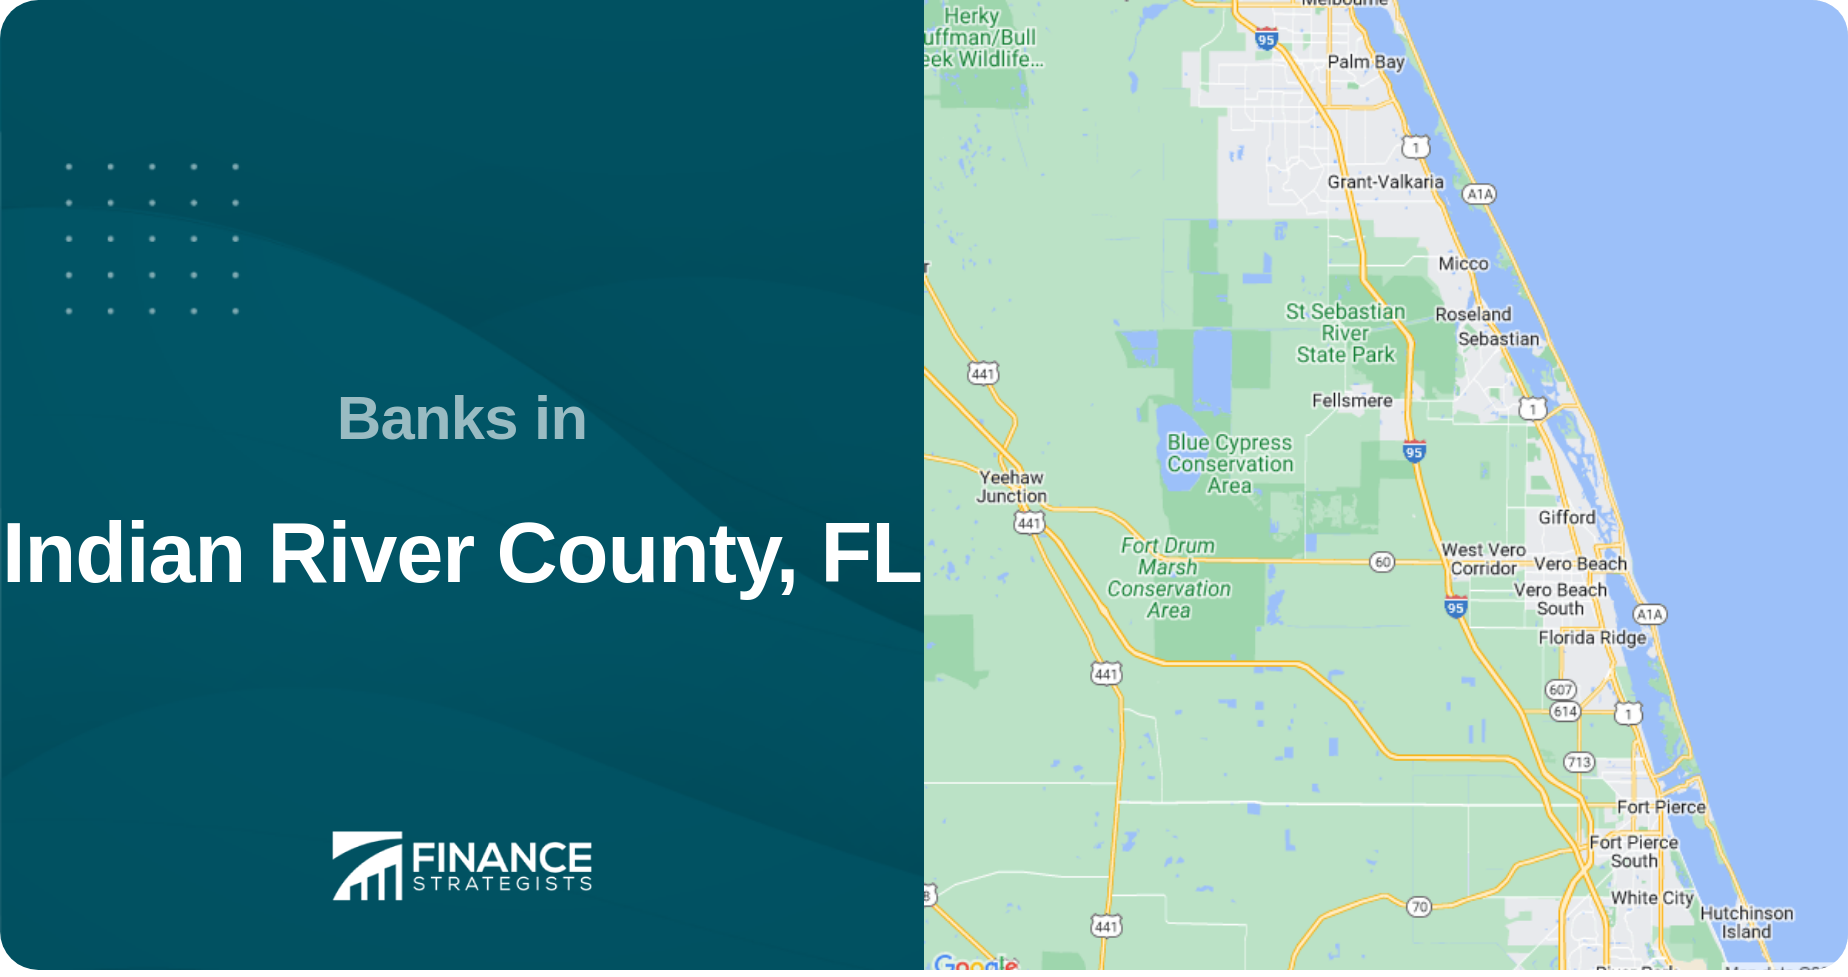 Banks in Indian River County, FL